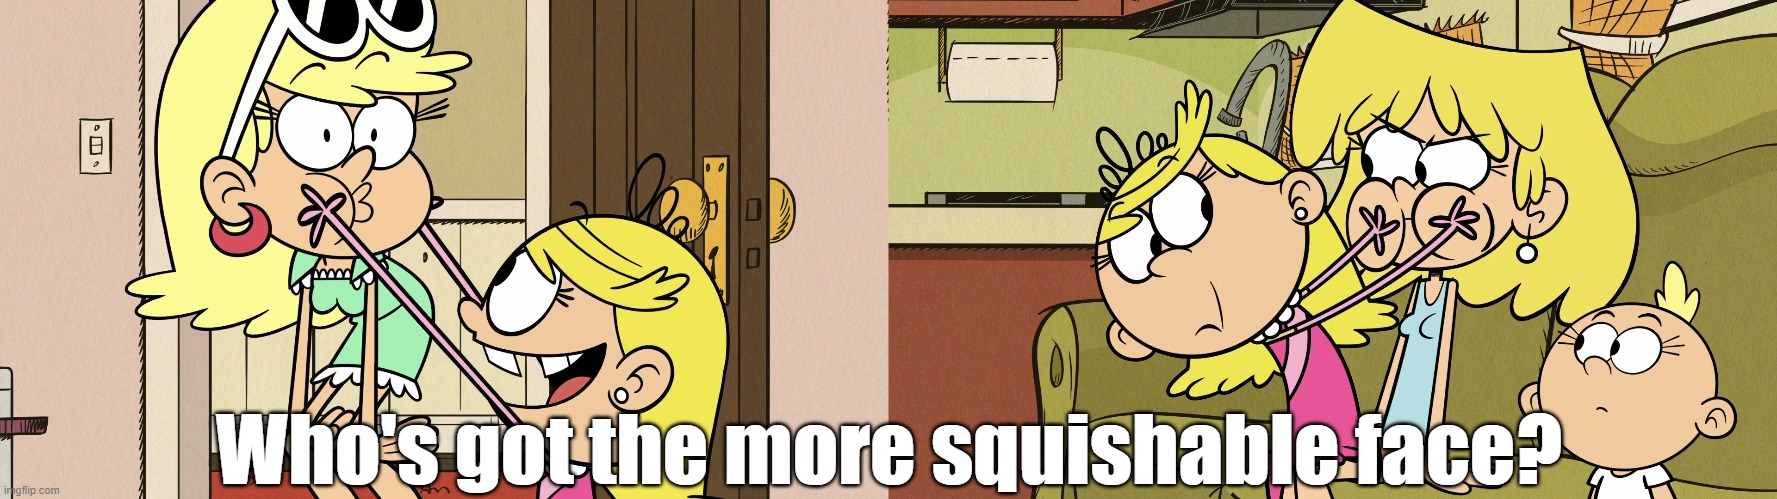 Battle of the squishable faces | Who's got the more squishable face? | image tagged in the loud house | made w/ Imgflip meme maker